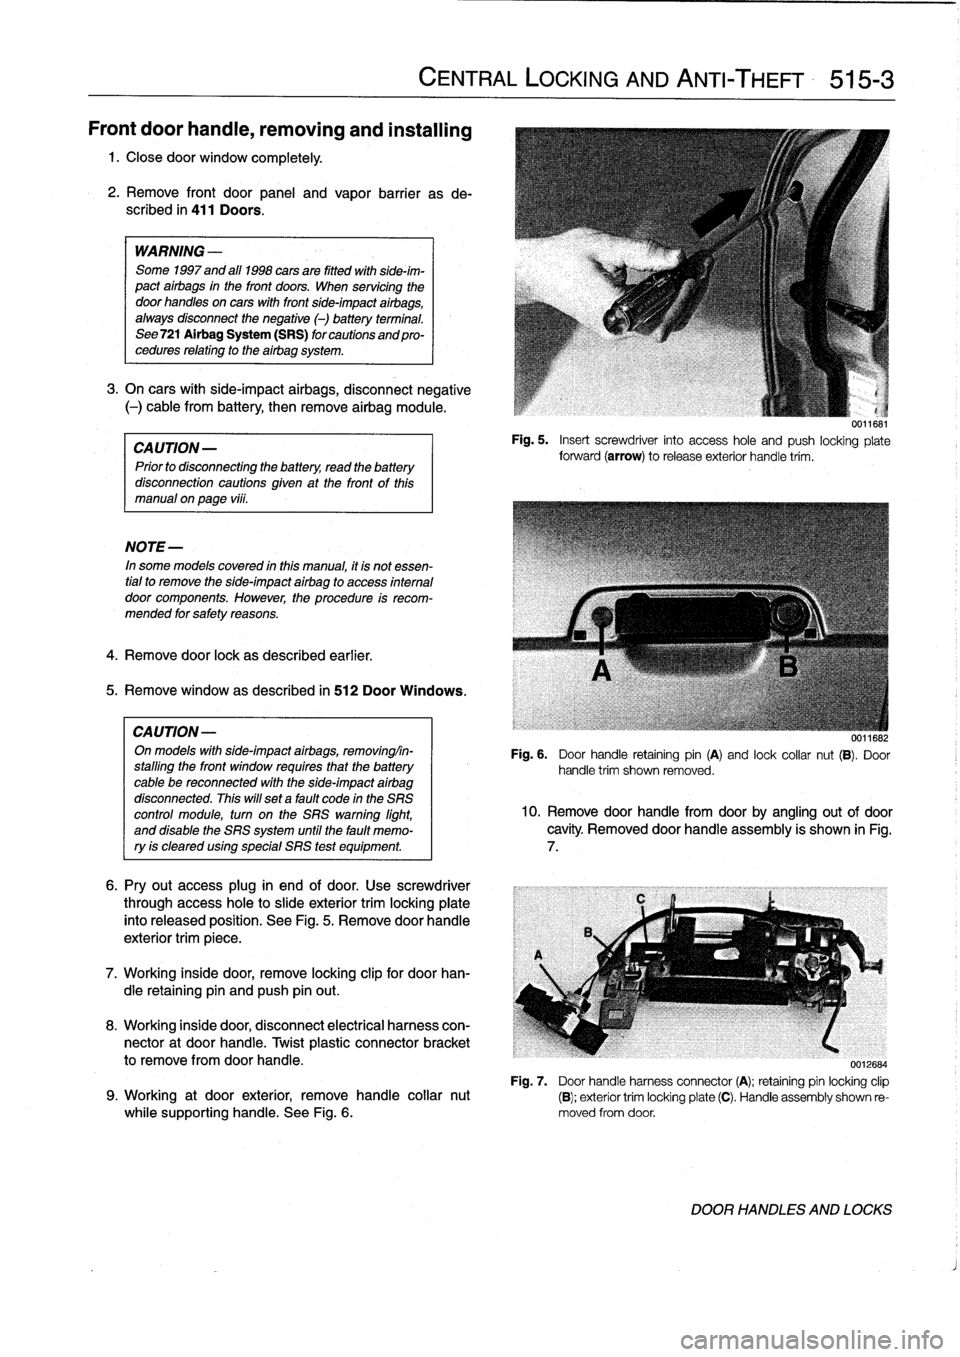 BMW M3 1993 E36 Workshop Manual 
Front
door
handle,
removing
and
installing

1
.
Closedoor
window
completely
.

2
.
Remove
front
door
panel
and
vapor
barrier
asde-
scribed
in
411
Doors
.

WARNING
-

Some
1997
and
al]
1998
cars
are
f